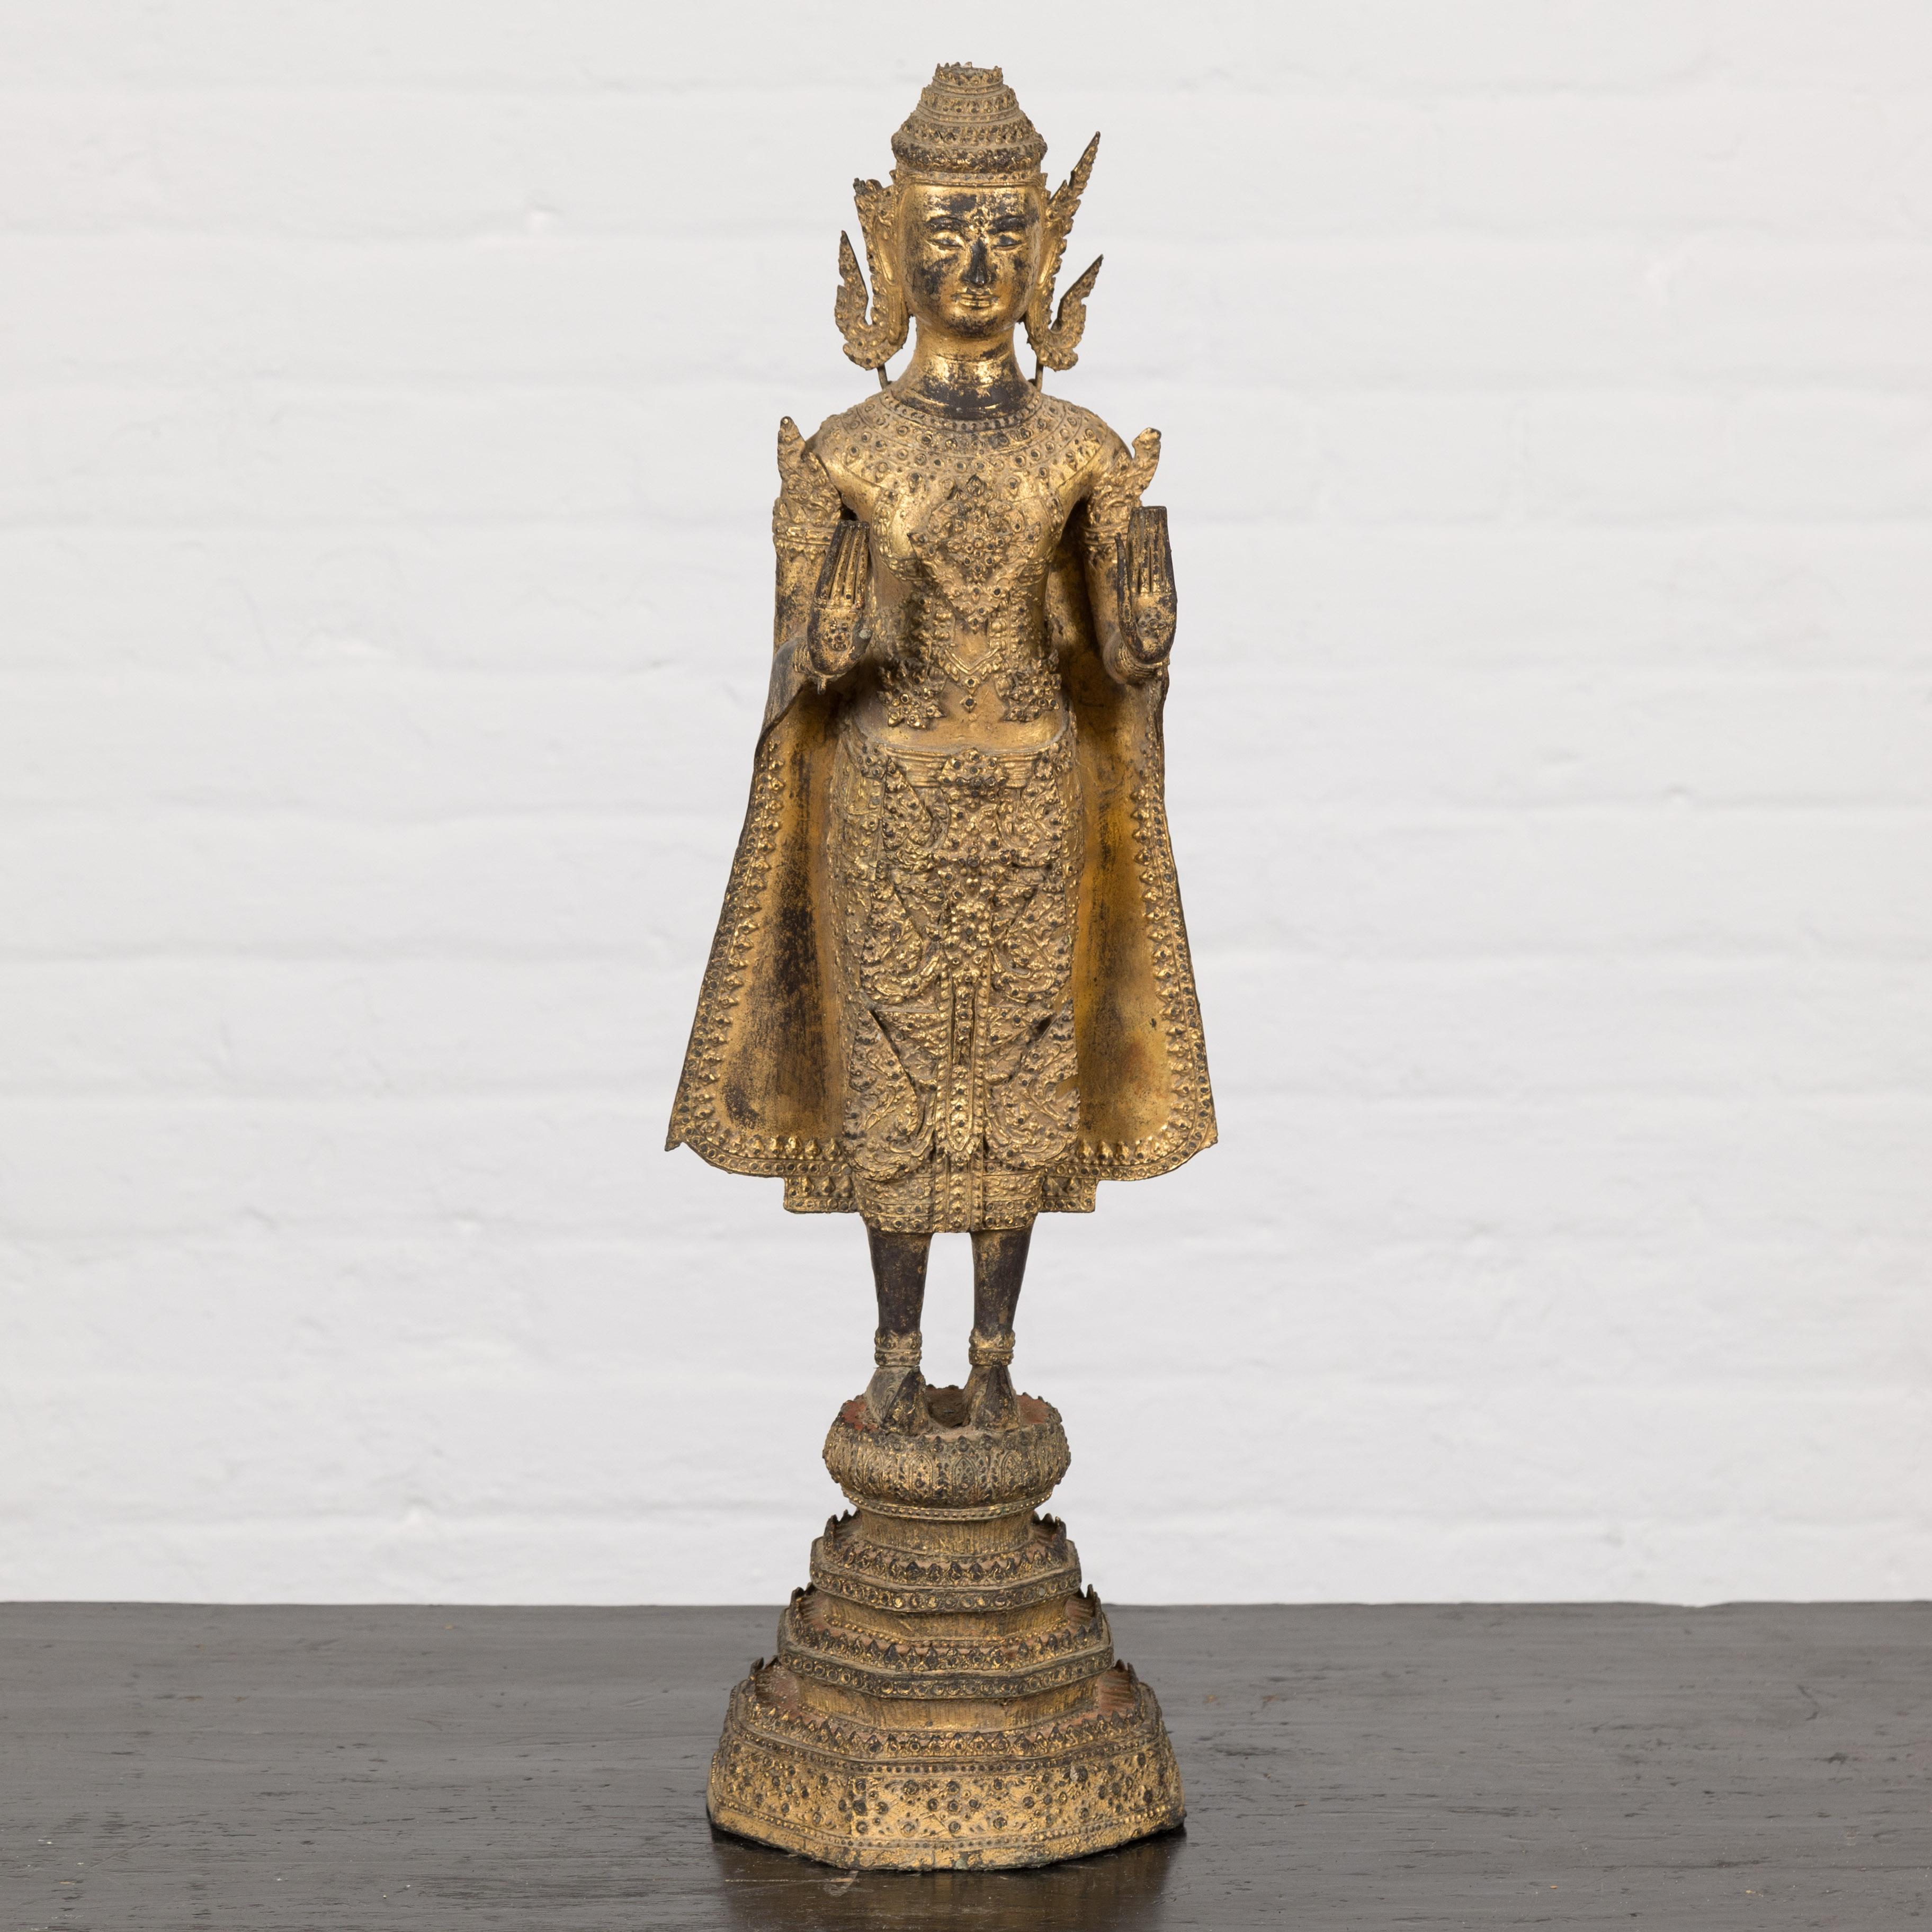 A 19th century Thai temple statue made from gilded bronze during the Rattanakosin Period (1782–1932). Steeped in spiritual resonance and artistry, this exquisite 19th-century Thai temple statue gracefully ushers the majesty of the Rattanakosin